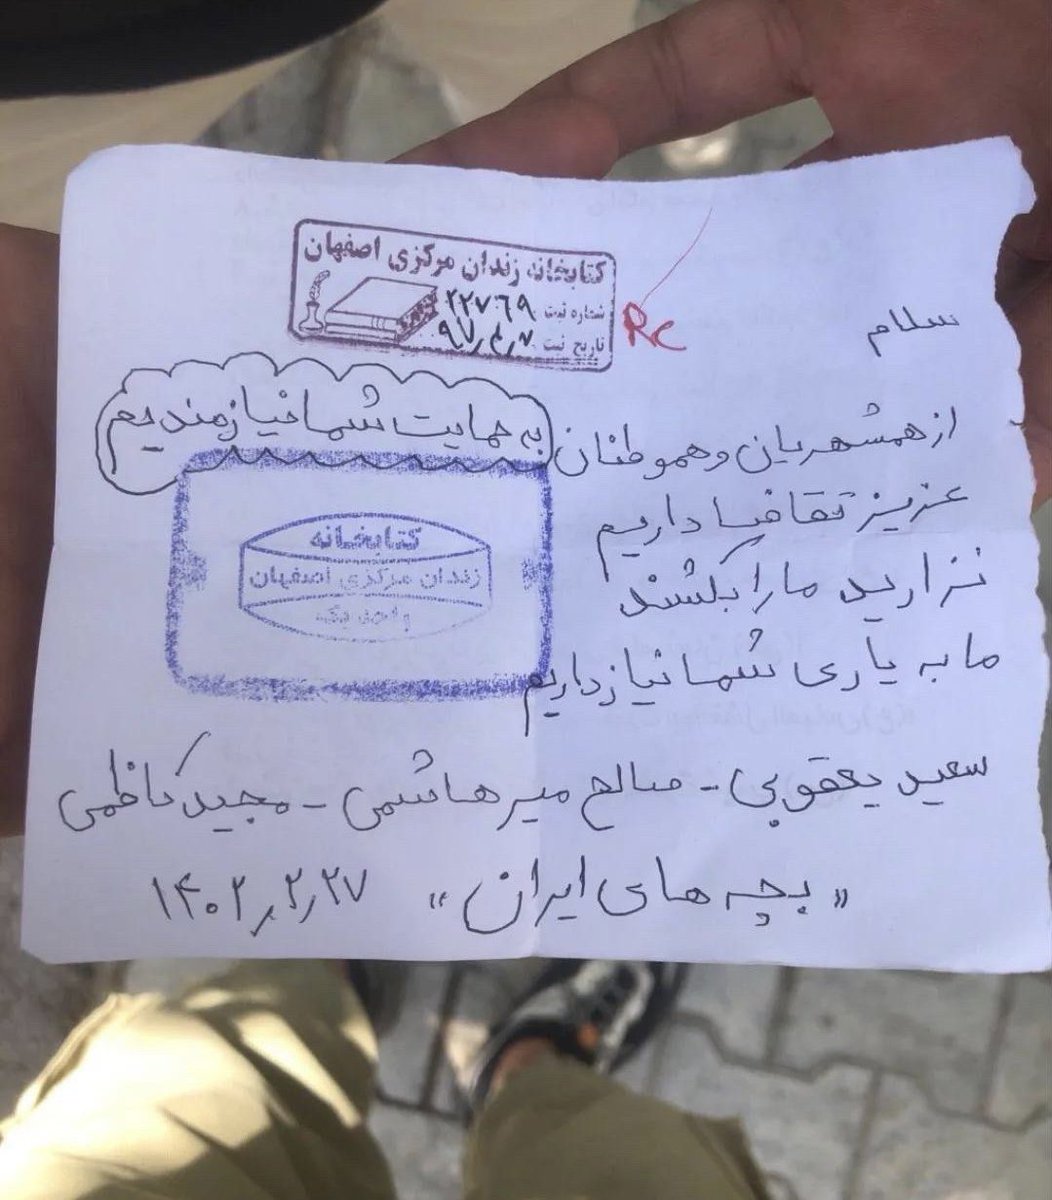 #SaeedYaghoubi, #SalehMirhashemi, & #MajidKazemi, 3 prisoners from the recent uprising who have been sentenced to death, have published a handwritten note from inside the prison in which, based on the concerns around their execution, they say: «#DoNotLetThemKillUs.»